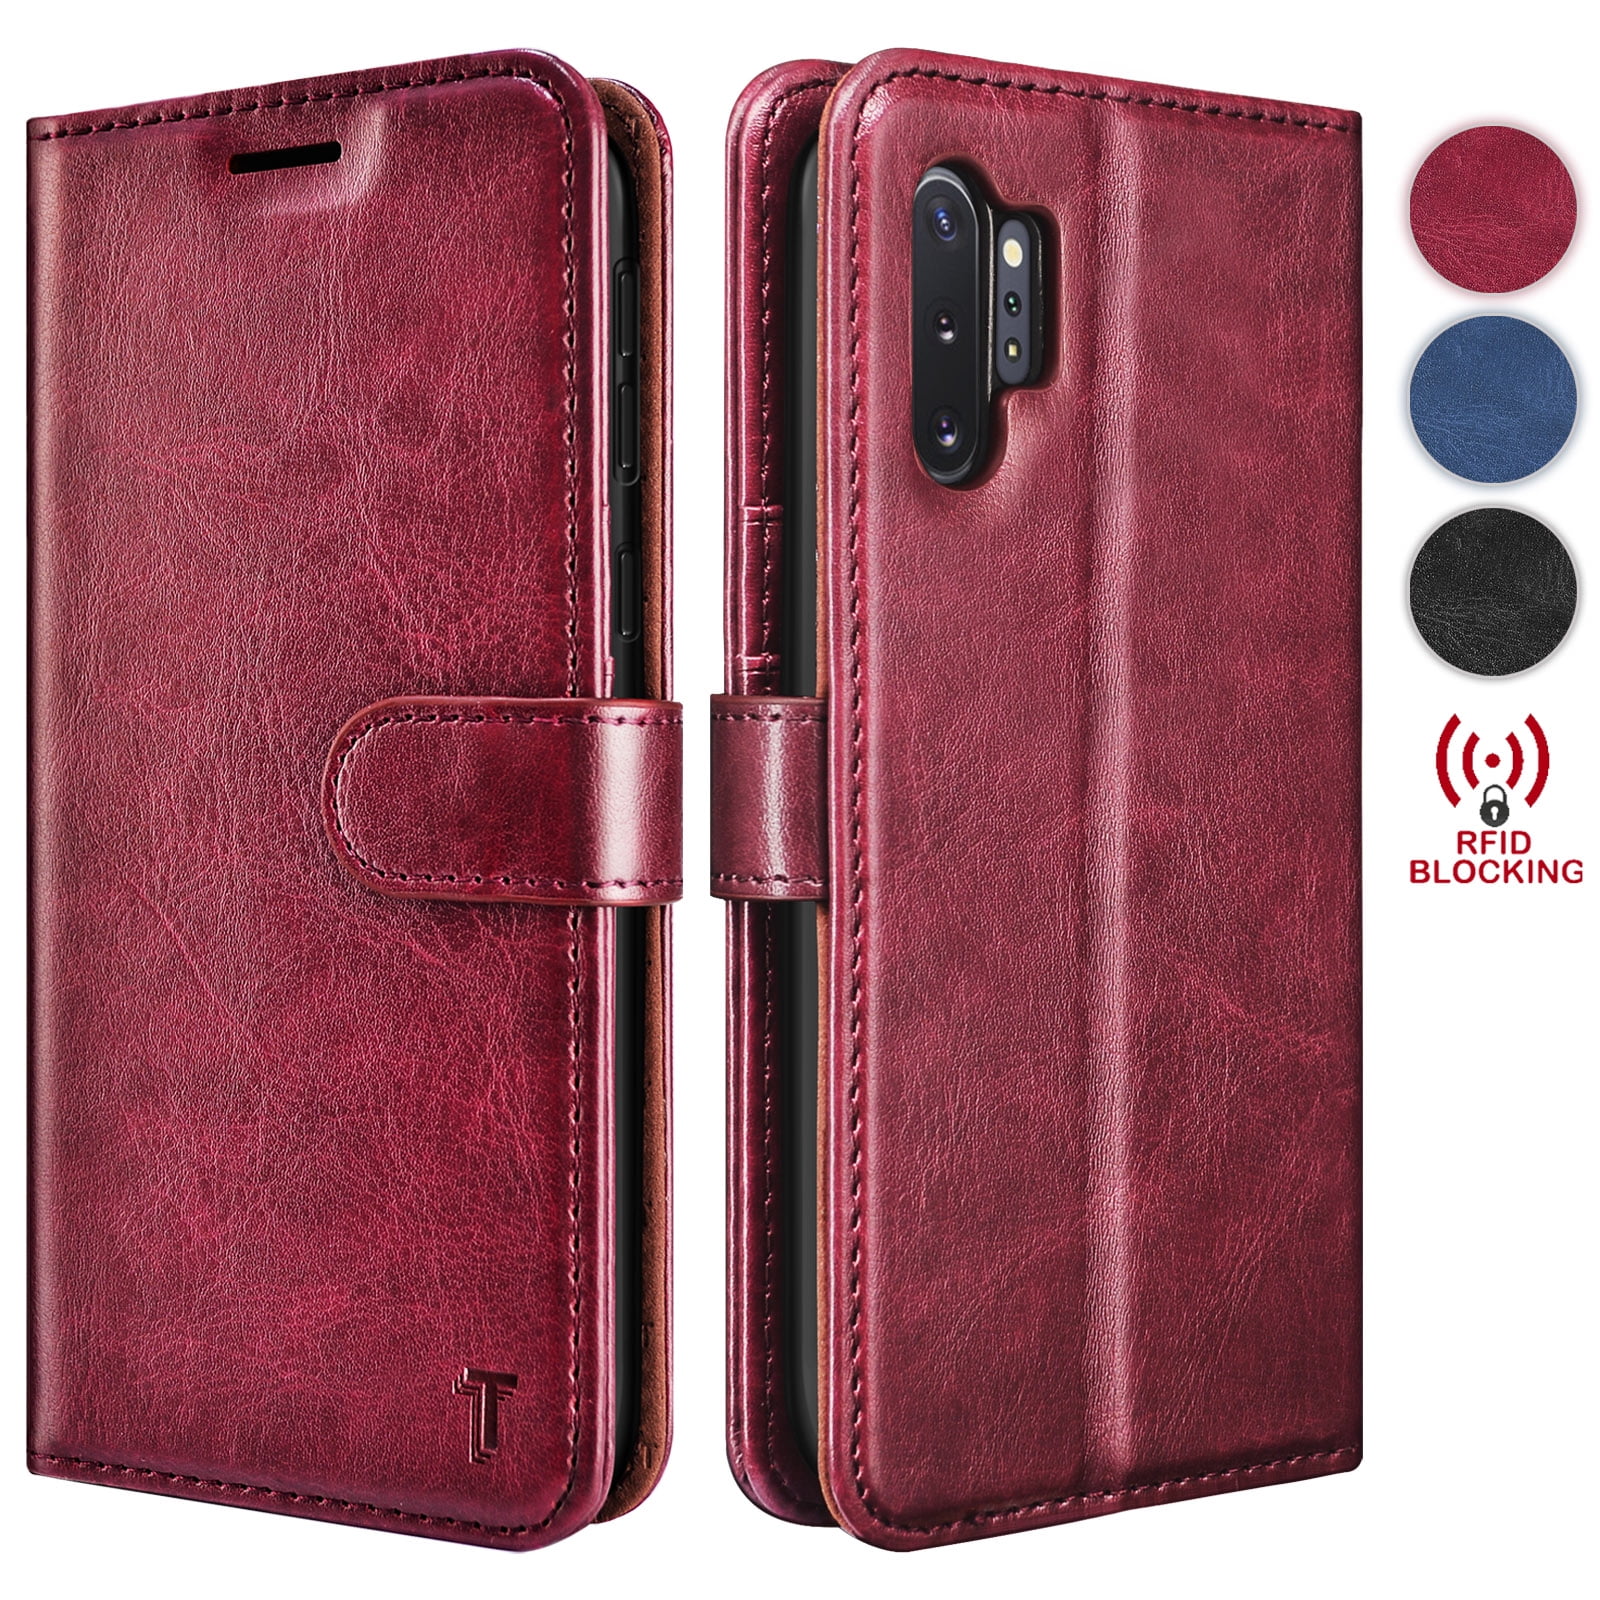 Stylish Cover Compatible with Samsung Galaxy Note 10 red Leather Flip Case Wallet for Samsung Galaxy Note 10 